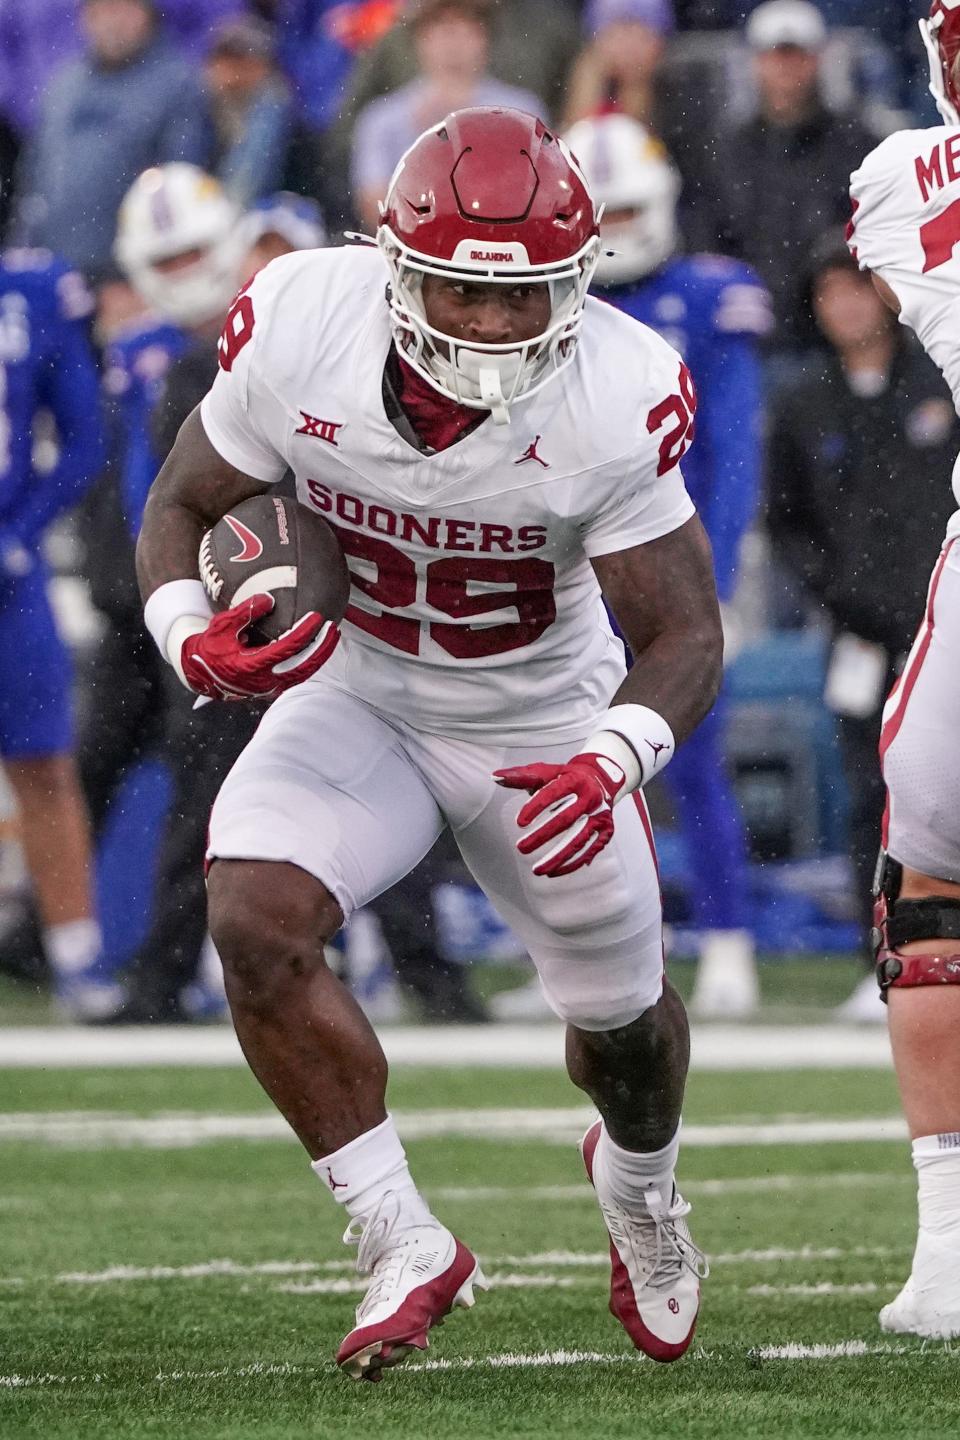 Tailback Tawee Walker, shown with Oklahoma last season, has been impressive this spring for Wisconsin.